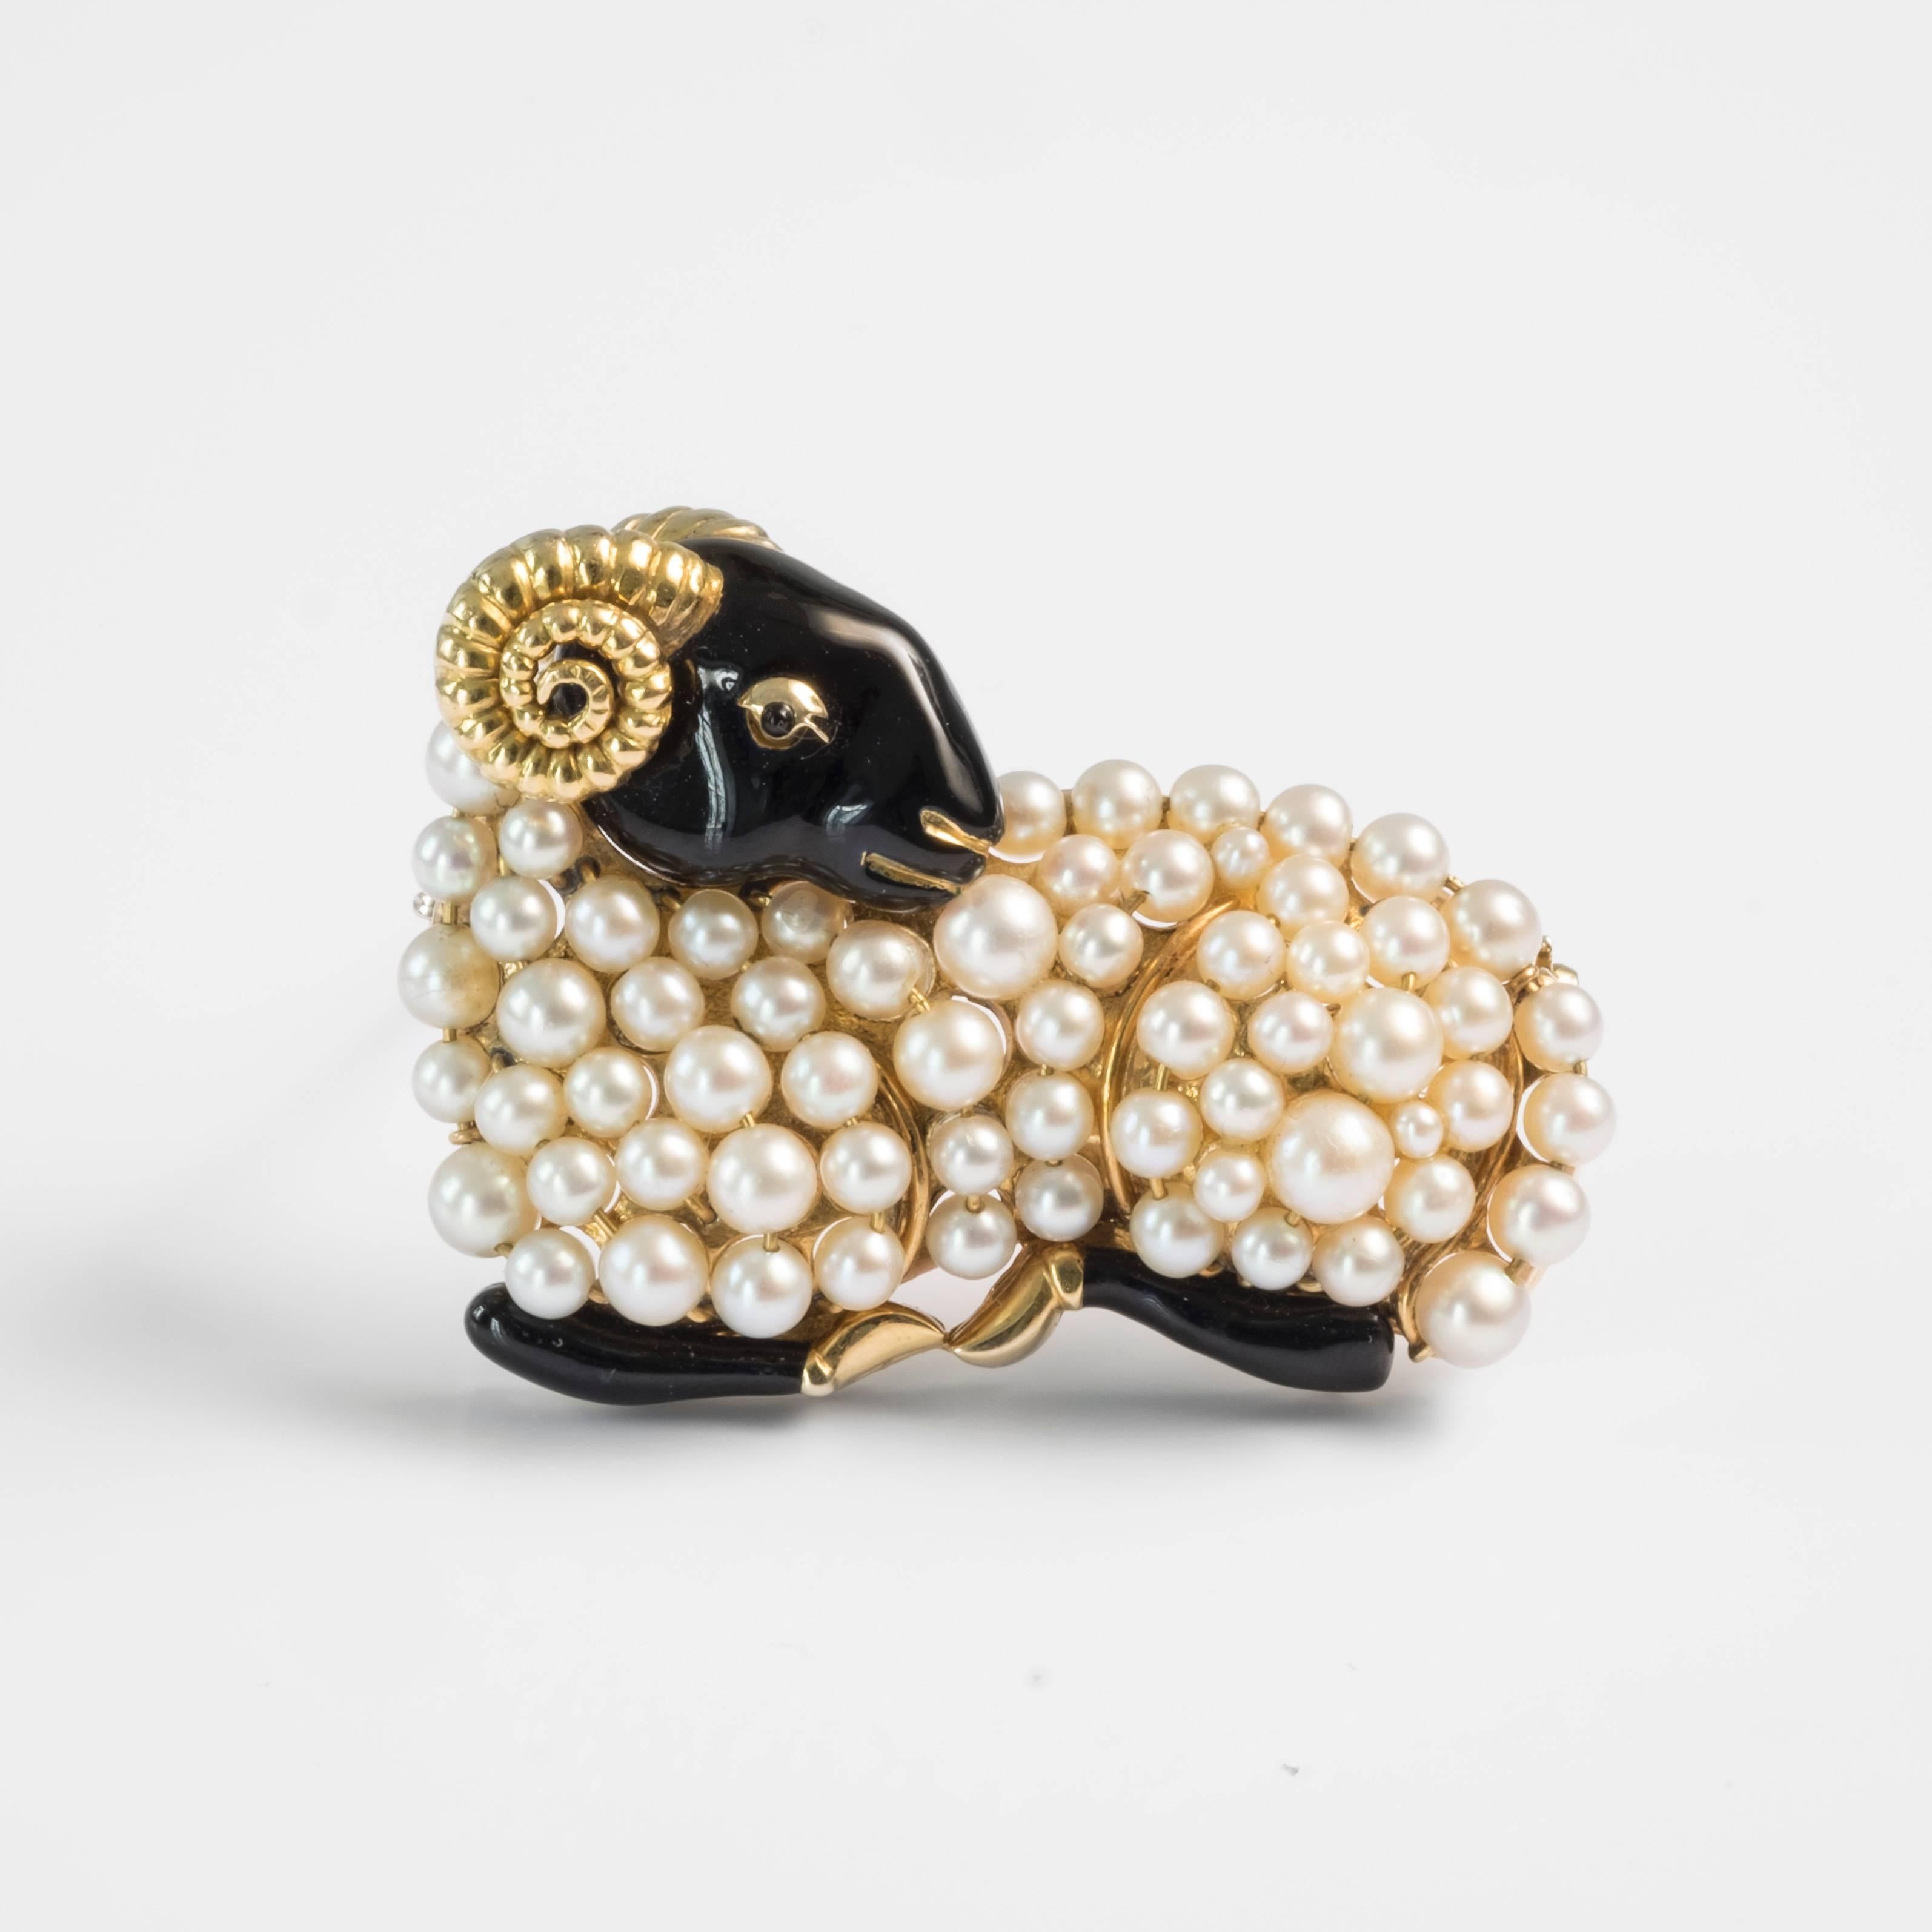 This 18k yellow gold brooch, designed by the prized French jeweler René Boivin, features a ram lying with his head on his shoulder. The ram’s head and legs are covered in black enamel, while it’s horn and feet are plated in gold. The body of the